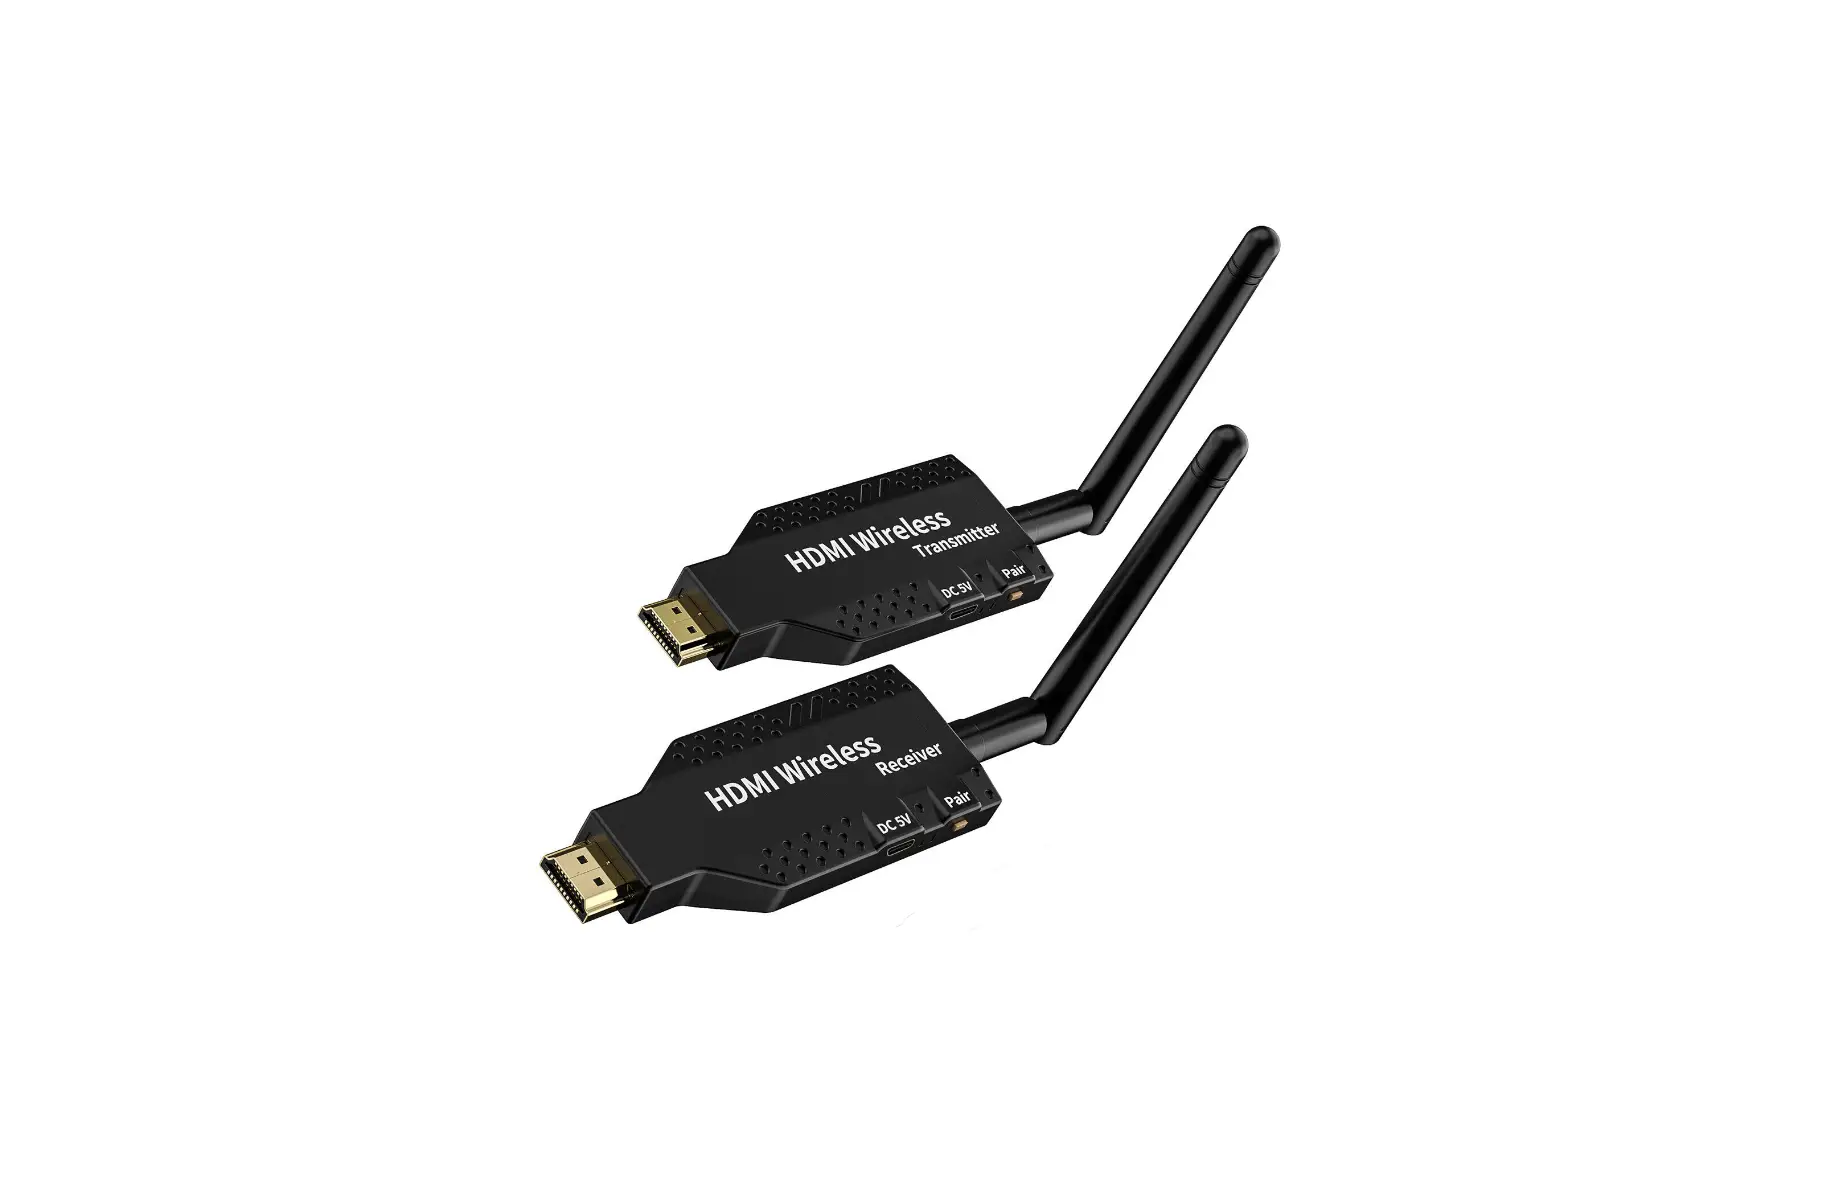 Wireless HDMI Mirror Transmitter and Receiver Cable